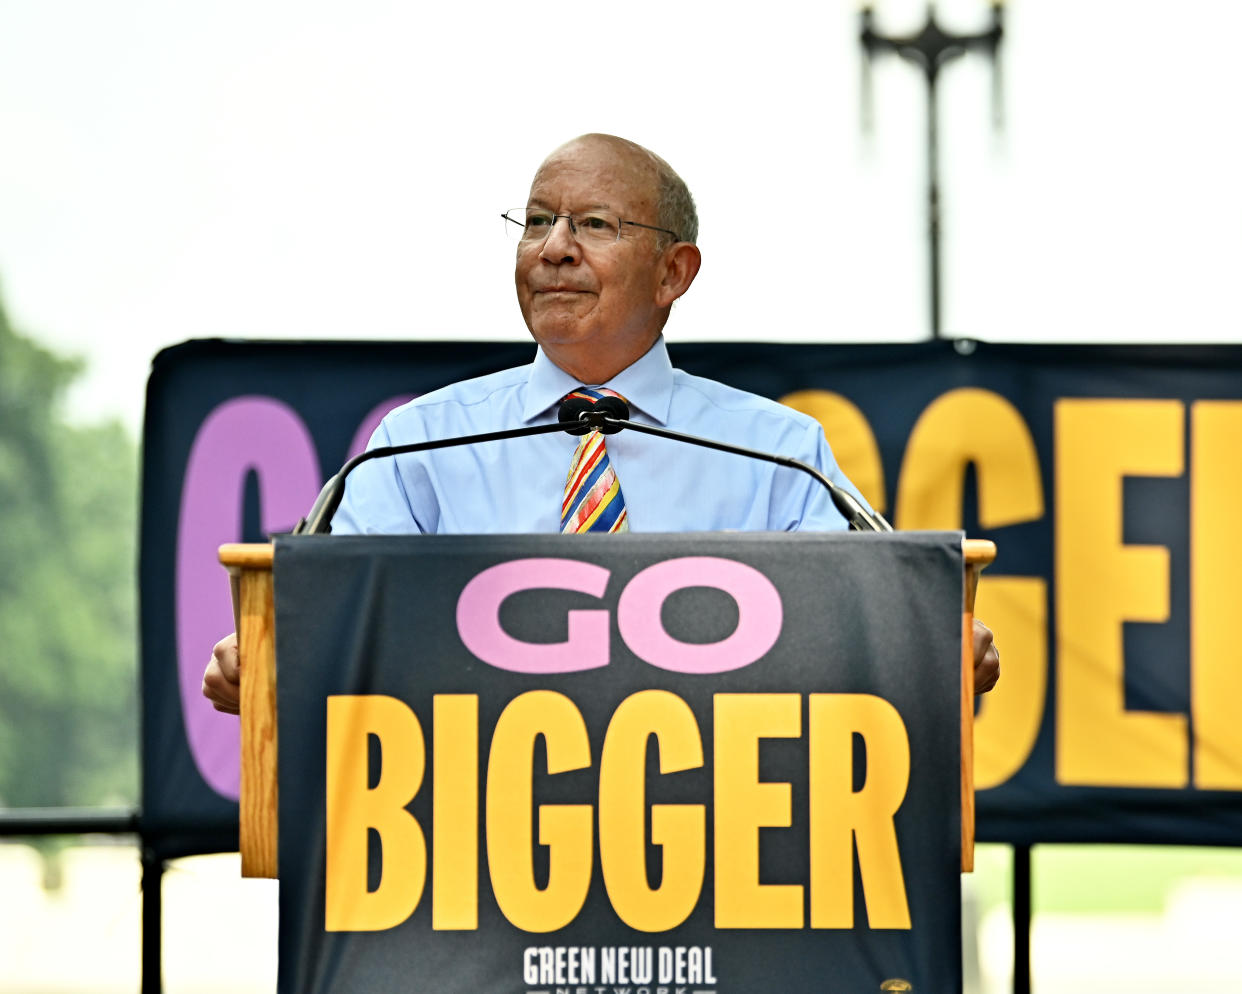 Rep. Peter DeFazio speaks at Go Bigger on Climate, Care, and Justice! on July 20, 2021 in Washington, DC. (Shannon Finney/Getty Images for Green New Deal Network)